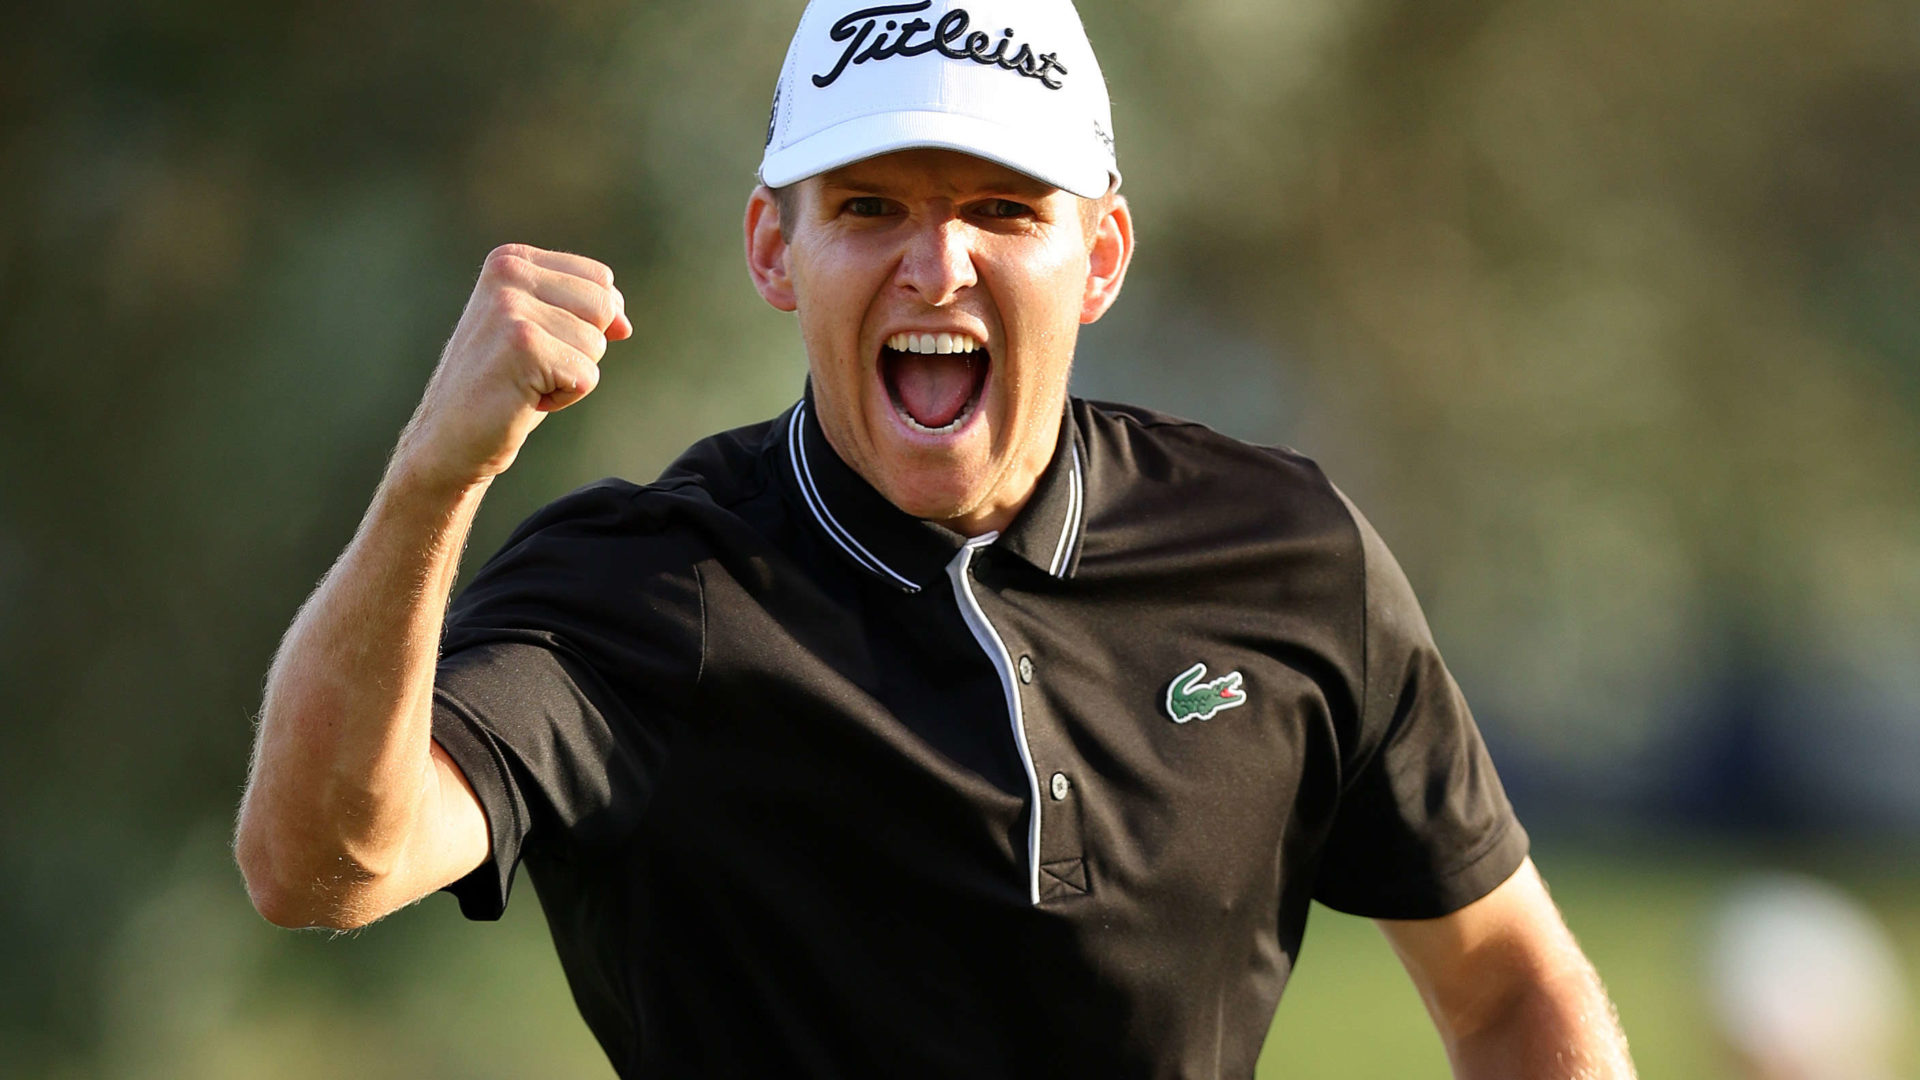 PALMA DE MALLORCA, SPAIN - OCTOBER 23: Yannik Paul of Germany celebrates after making a birdie on the 18th green to win the Mallorca Golf Open at Son Muntaner Golf Club on October 23, 2022 in Palma de Mallorca, Spain. (Photo by Andrew Redington/Getty Images)